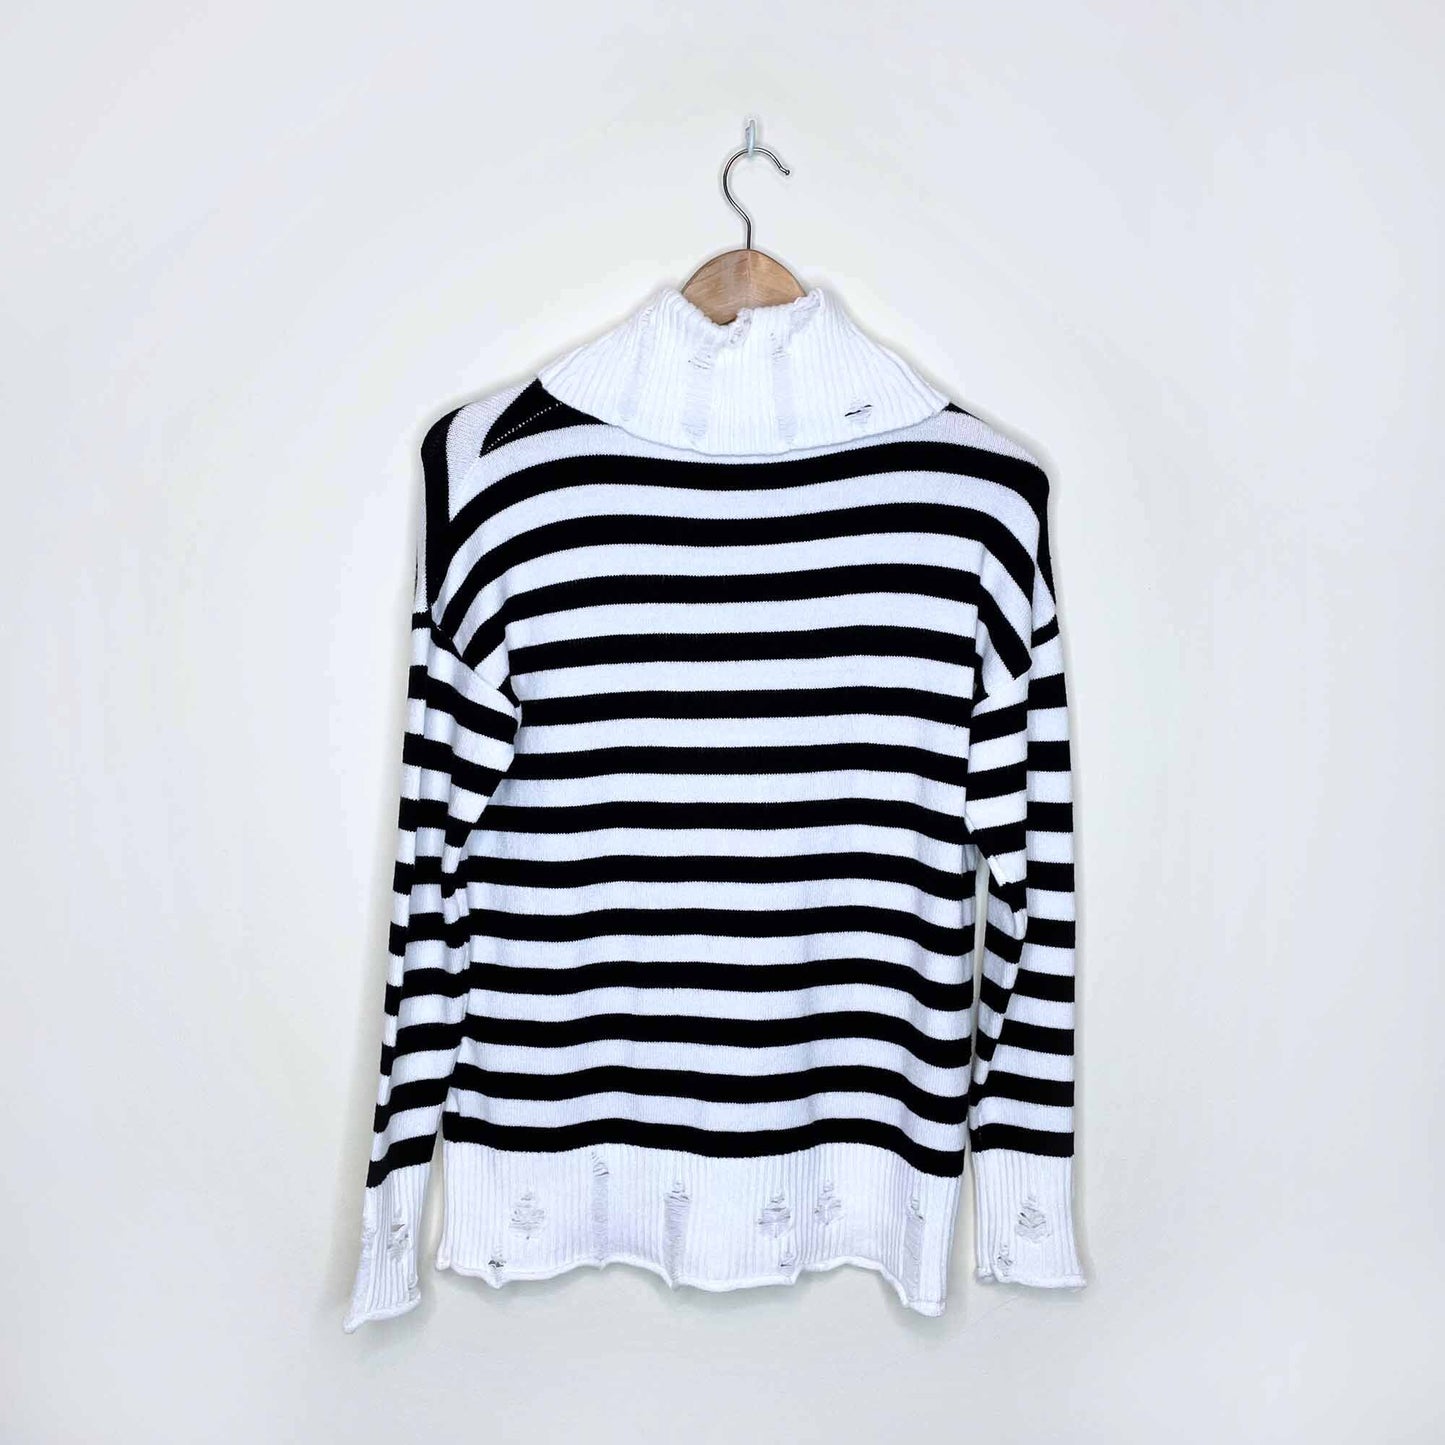 elana wang cozy striped distressed turtleneck sweater - size small